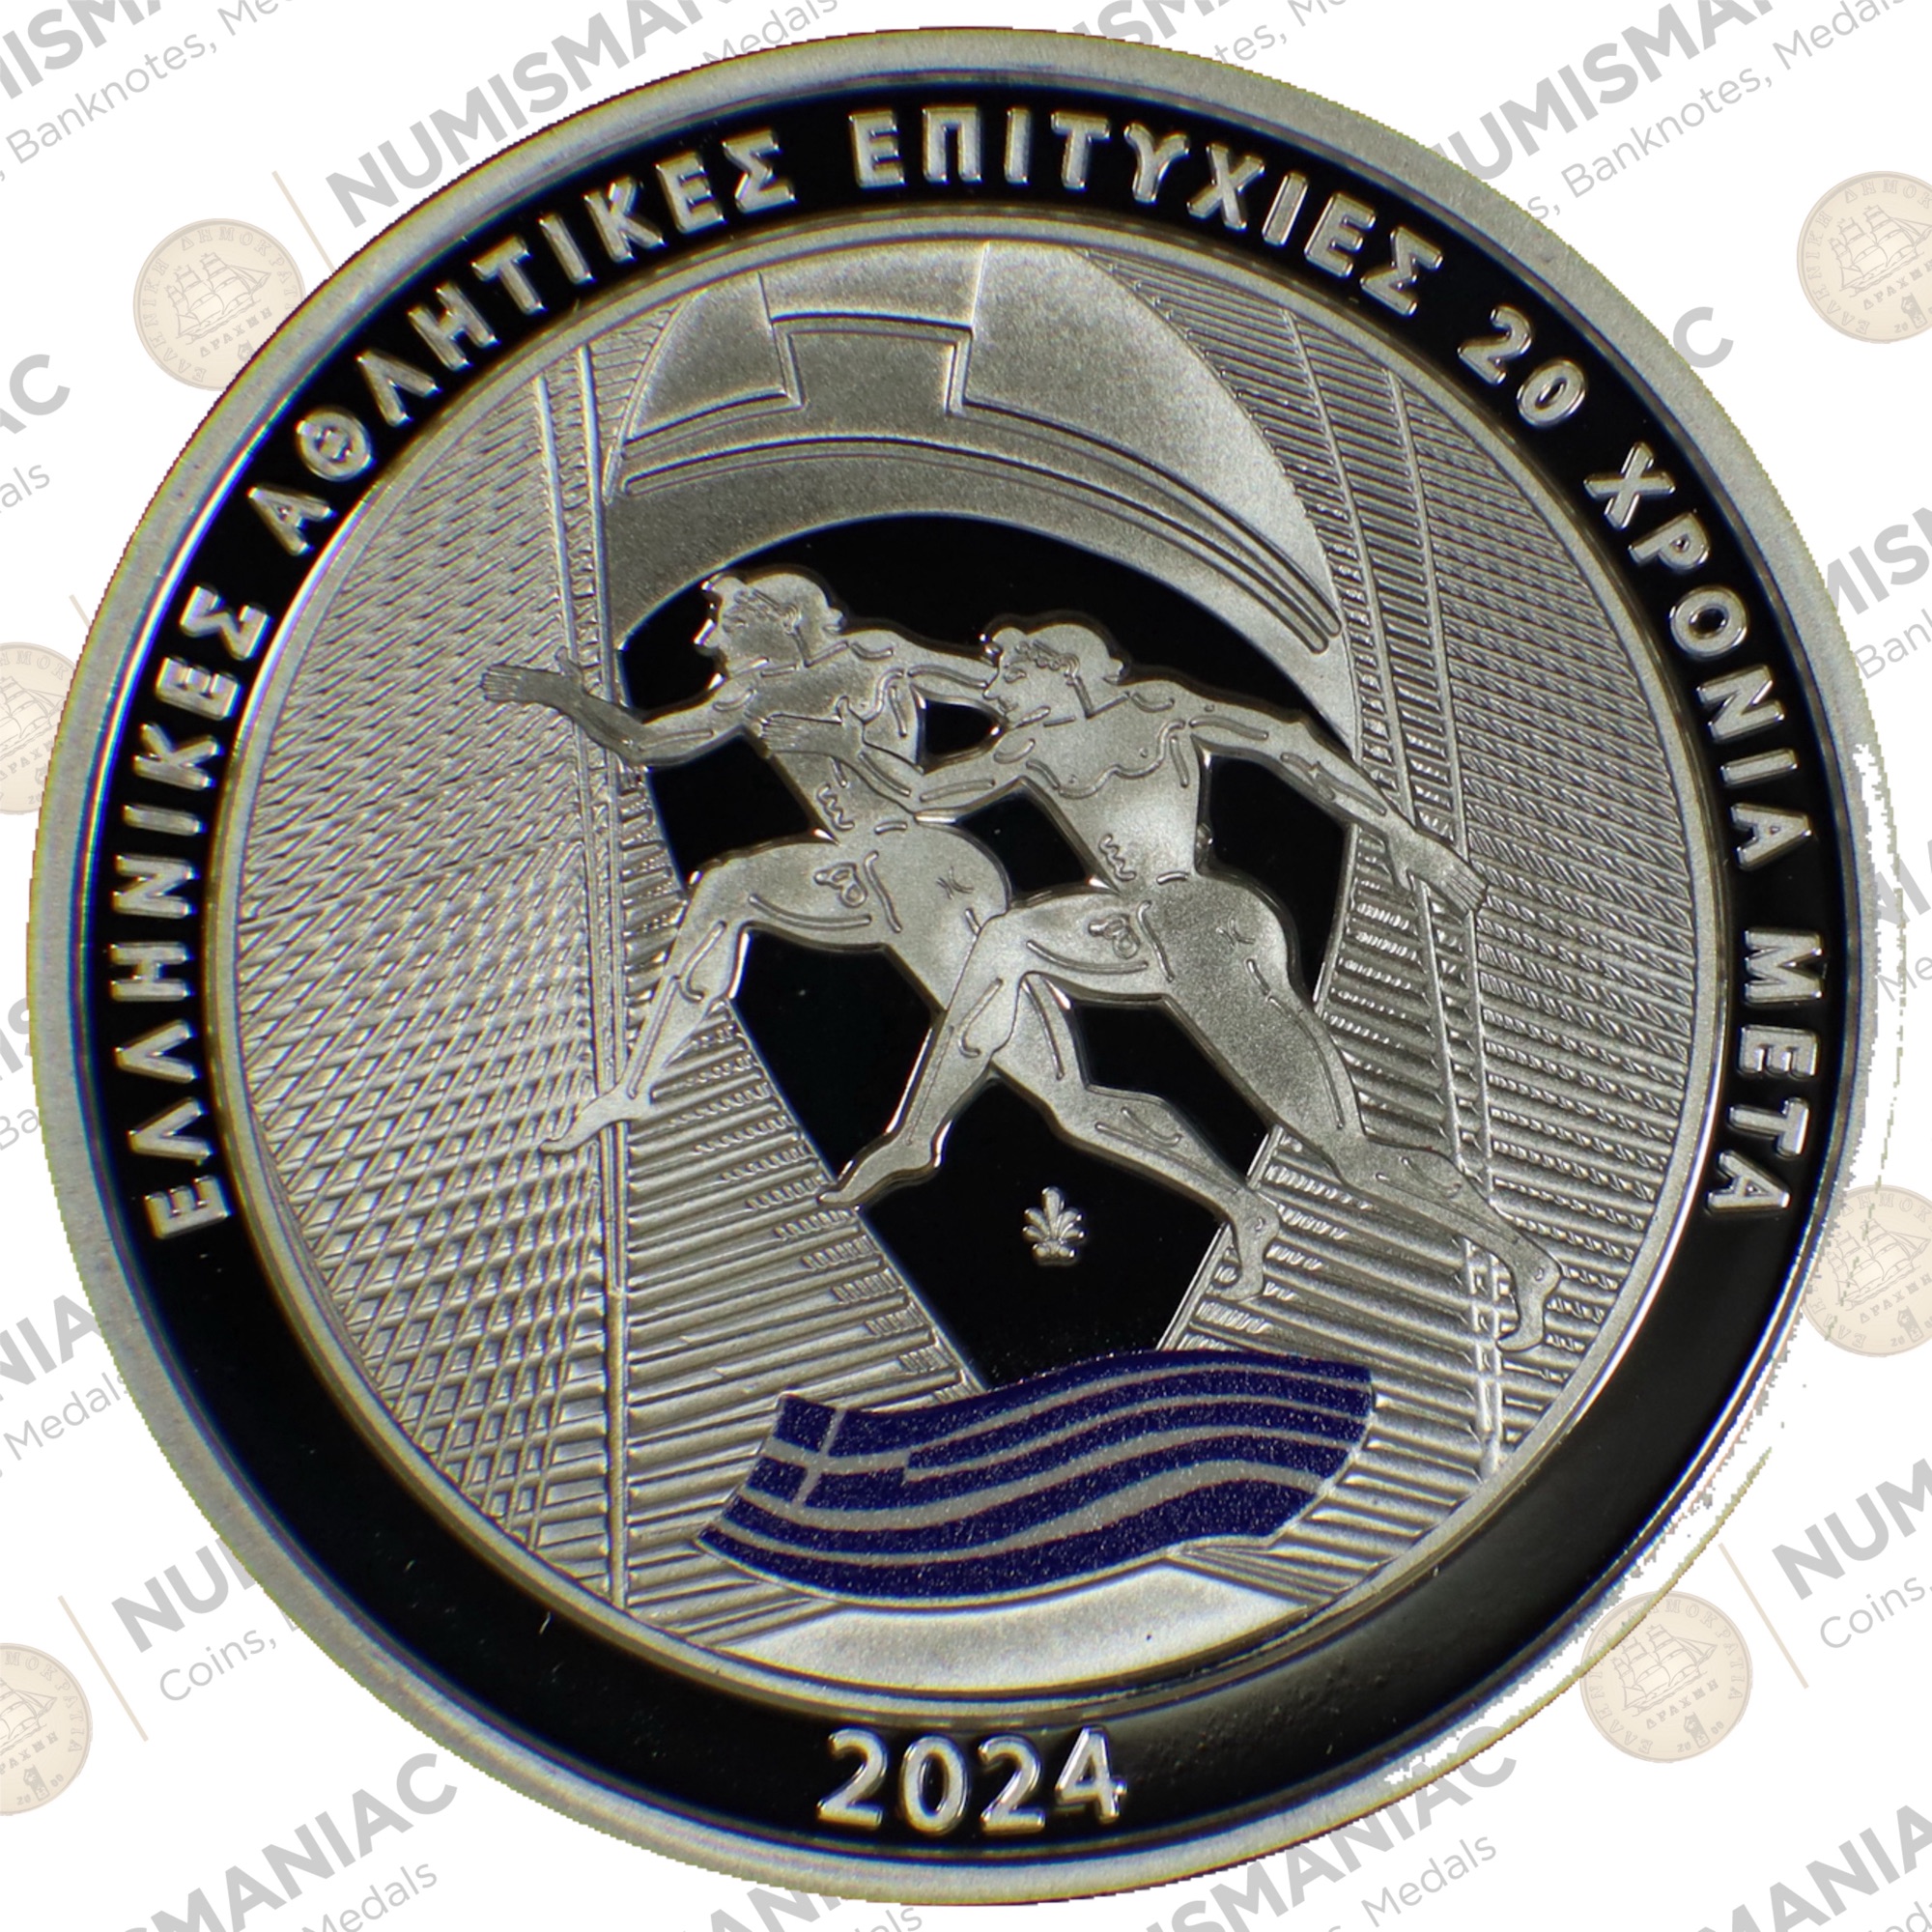 Greece 🇬🇷 2024 Silver Coin € 10 "20 years from the Athens 2004 Olympics and Paralympics". A